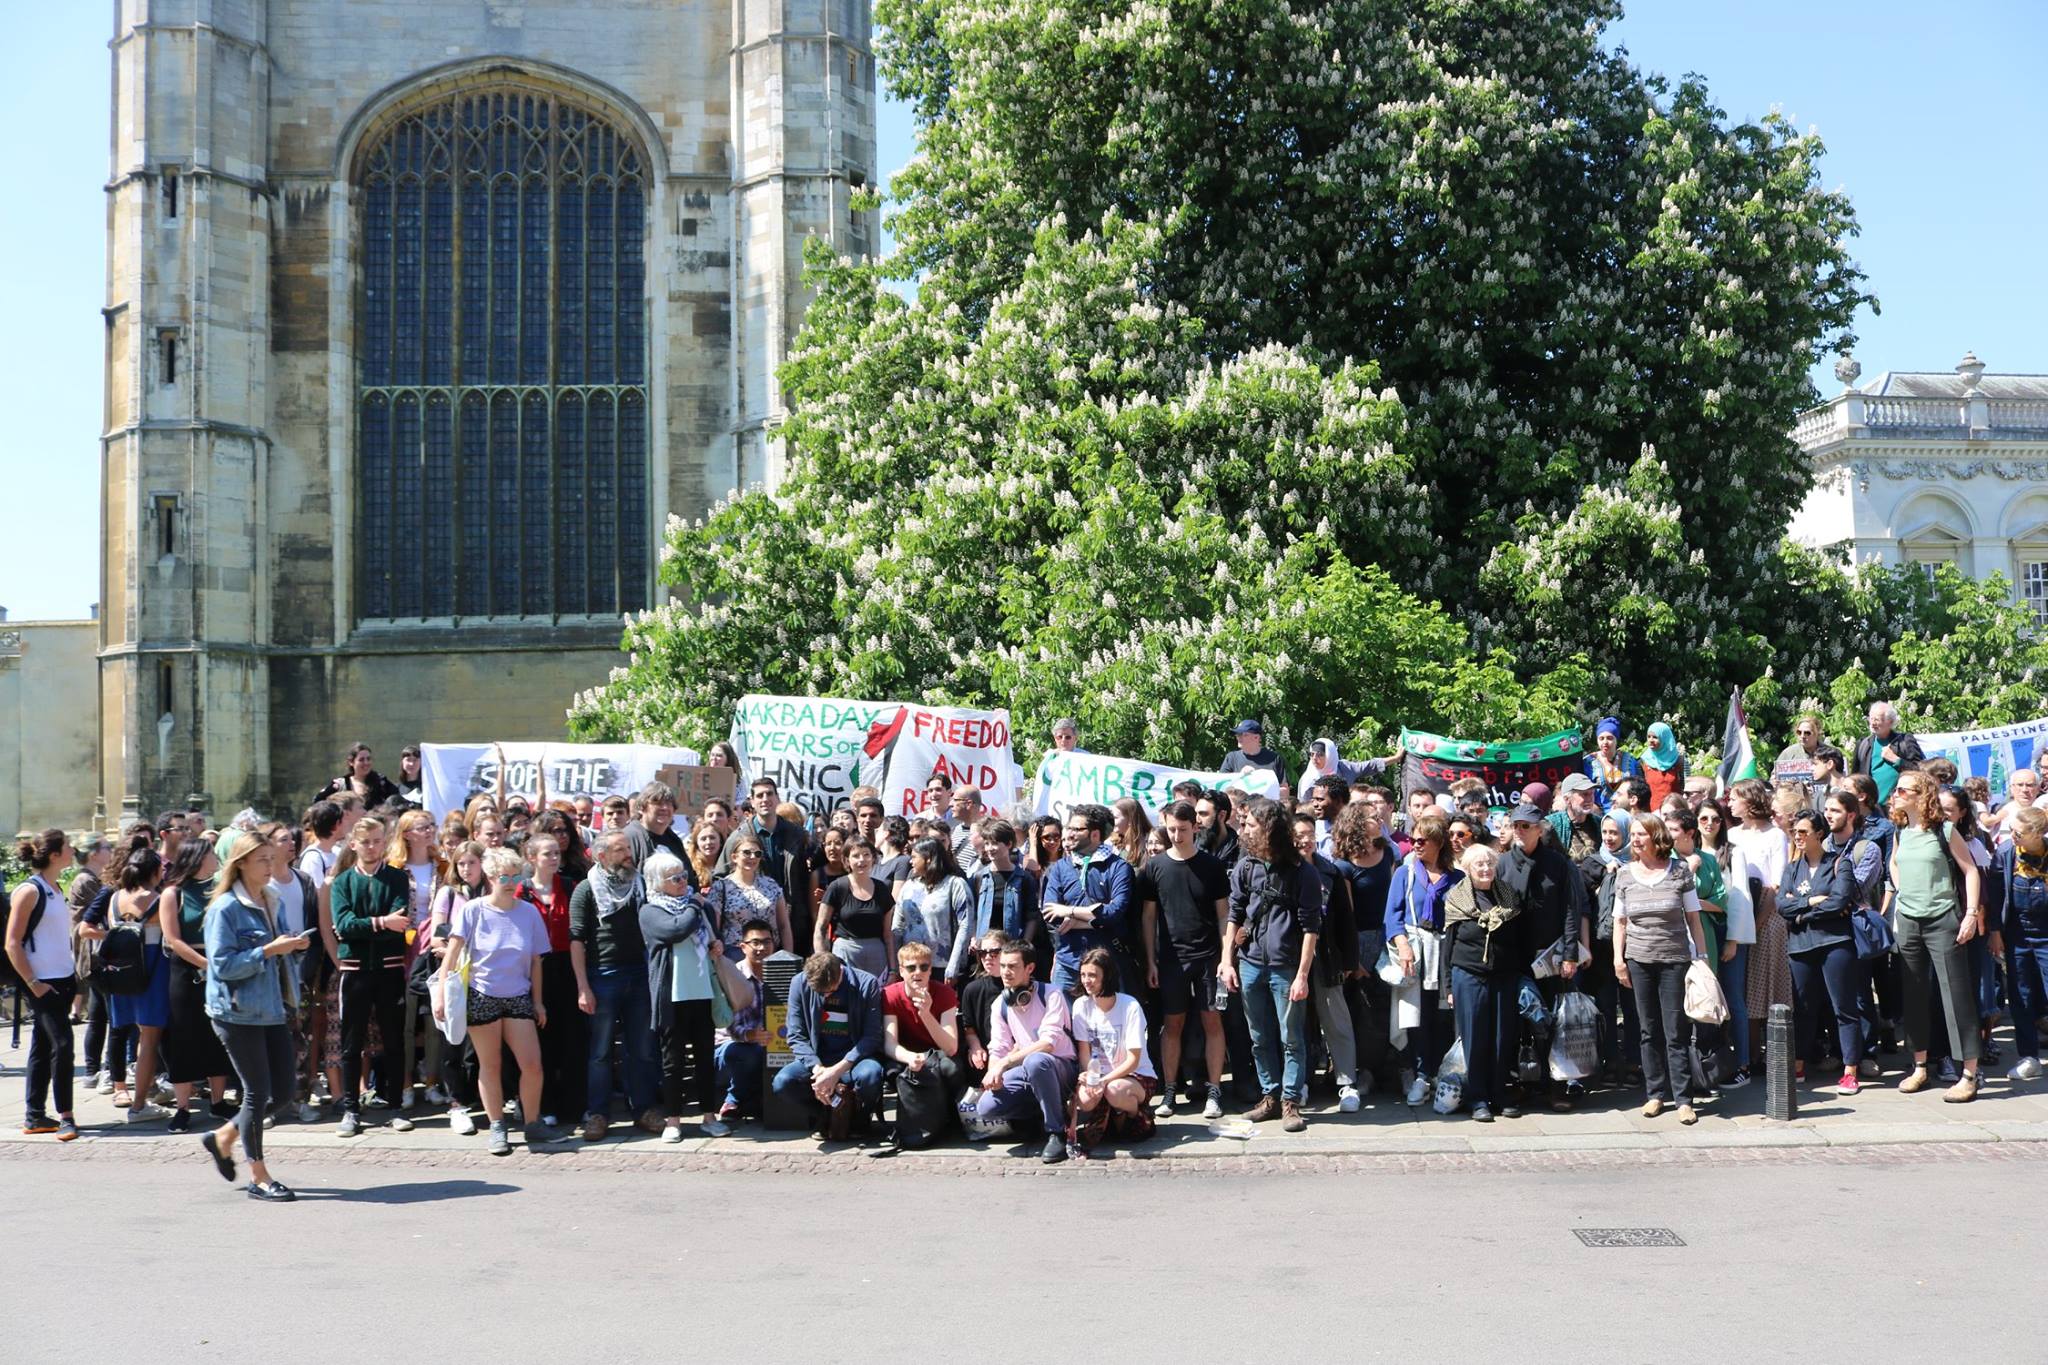 38 Cambridge University student groups demand University end its complicity in war crimes by terminating links with BAE Systems and Caterpillar Inc.